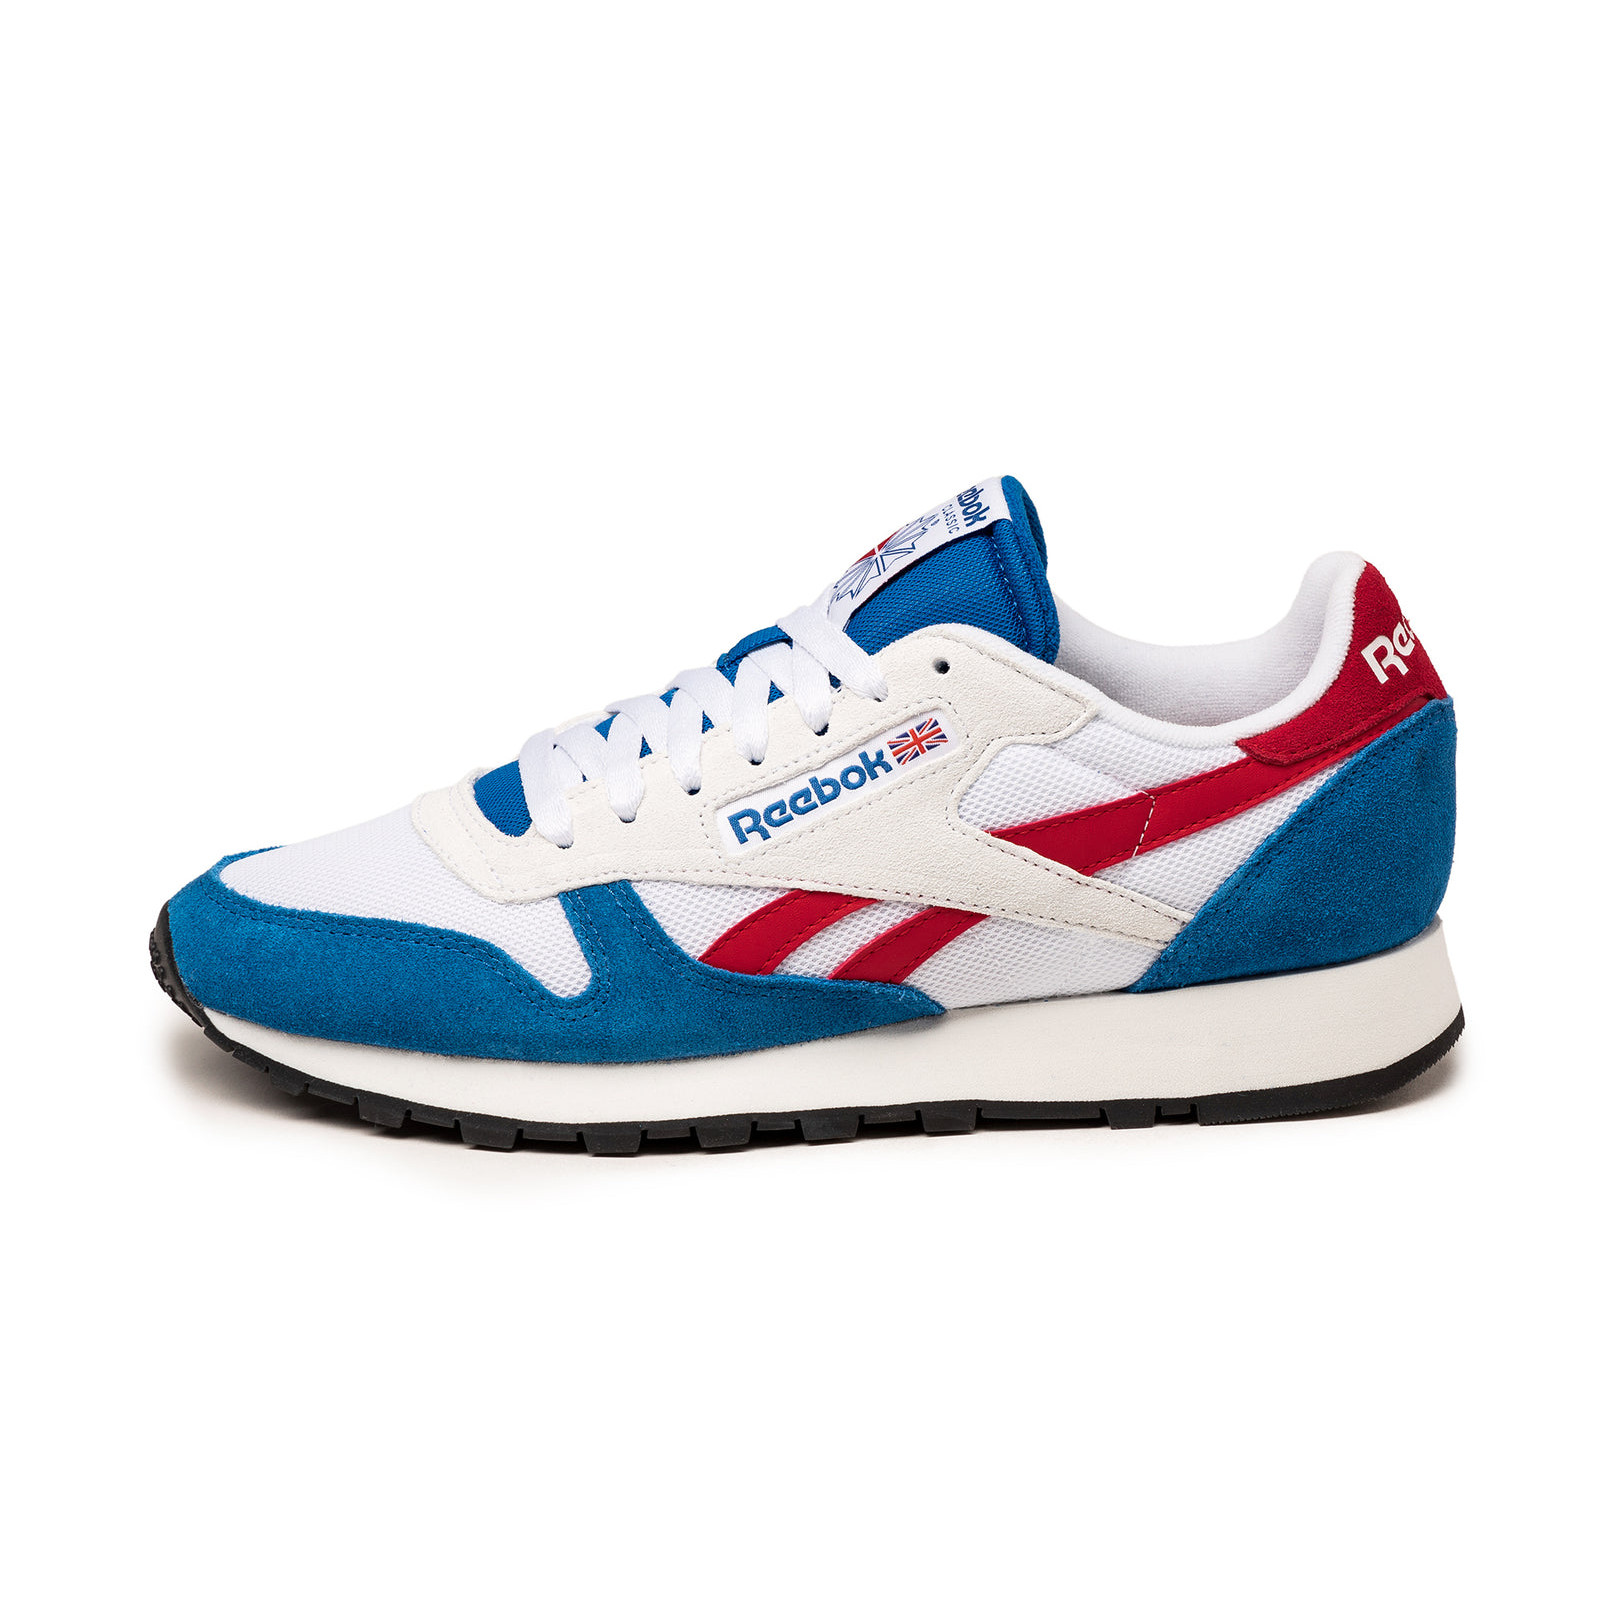 Reebok Classic Leather
Blue / White Red